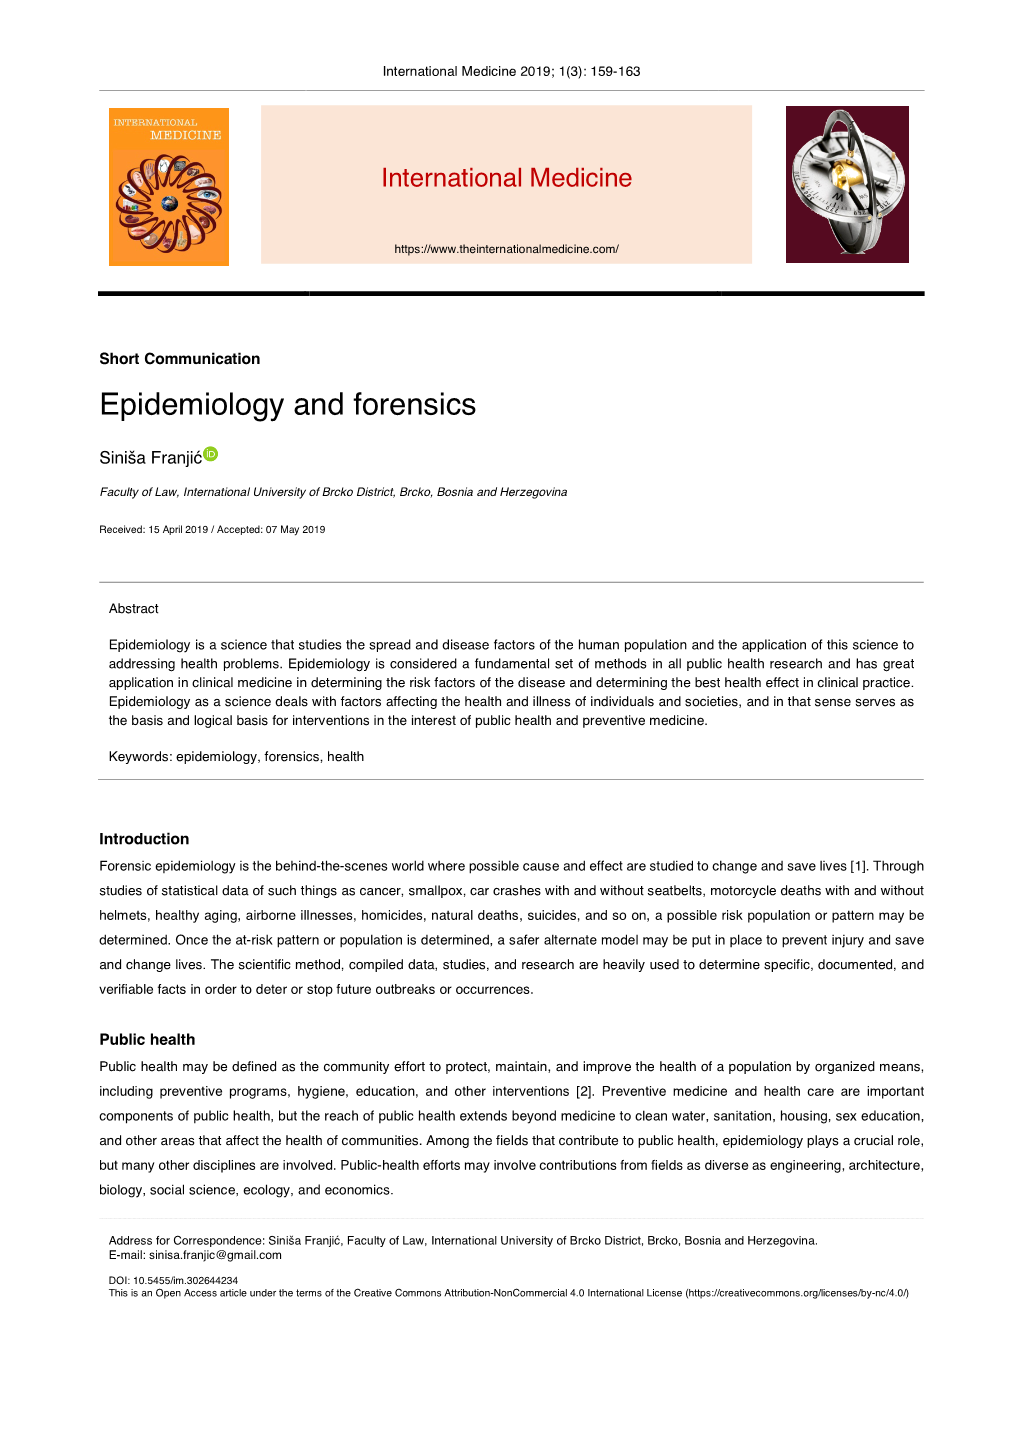 Epidemiology and Forensics